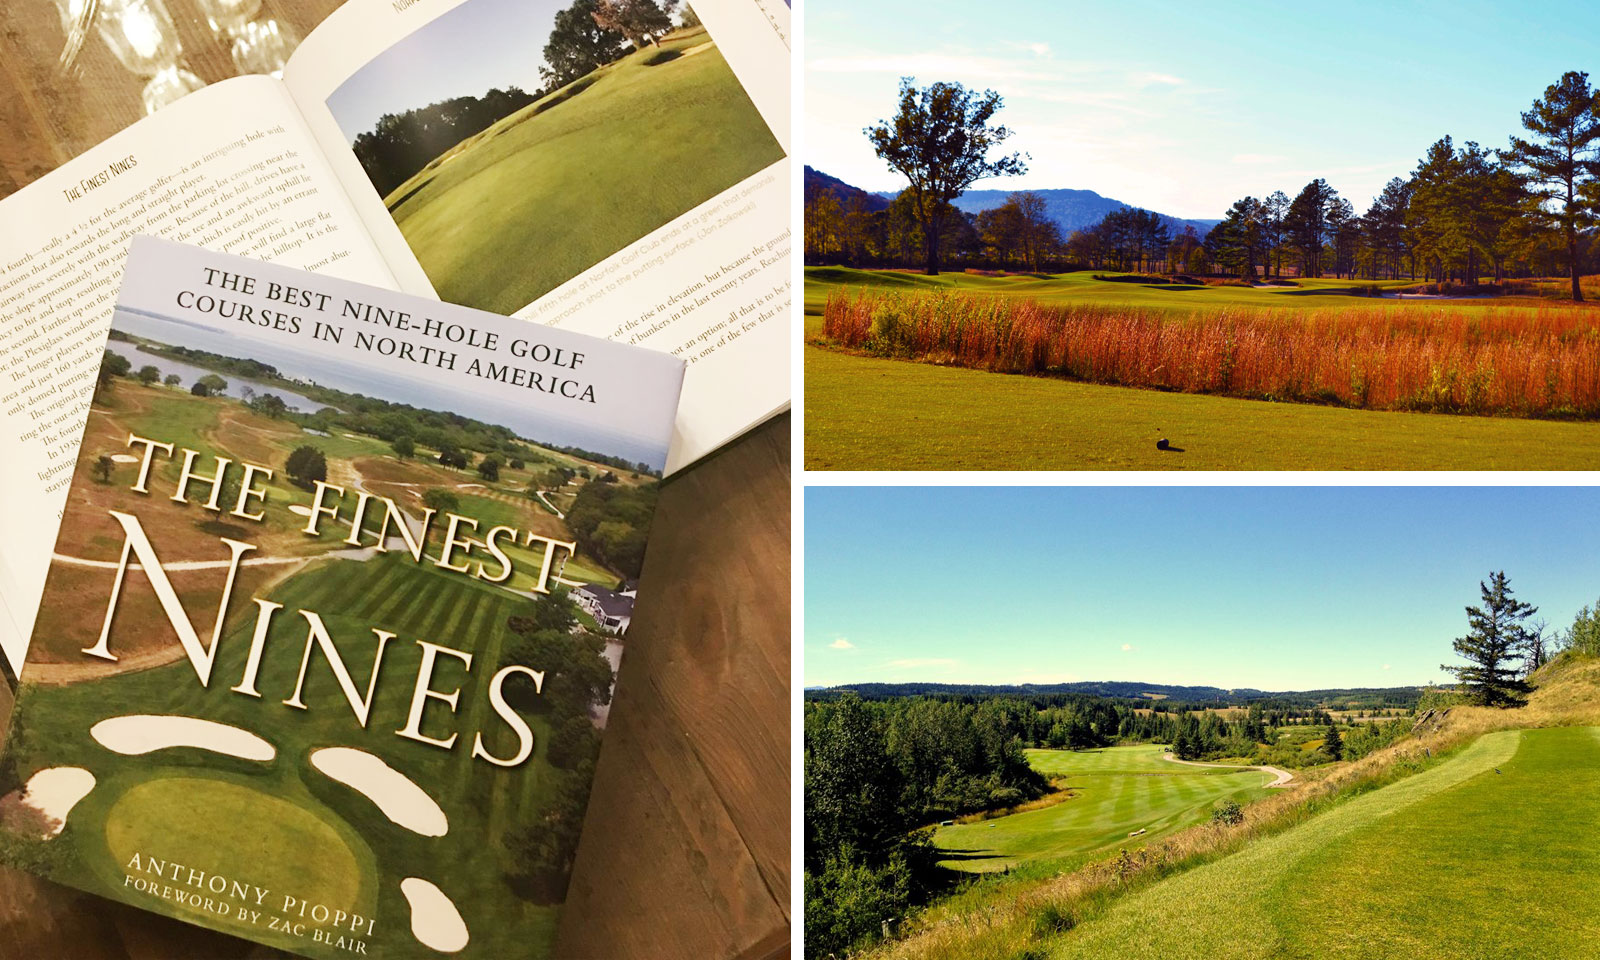 Sweetens Cove Golf Club and LivingStone Golf Course